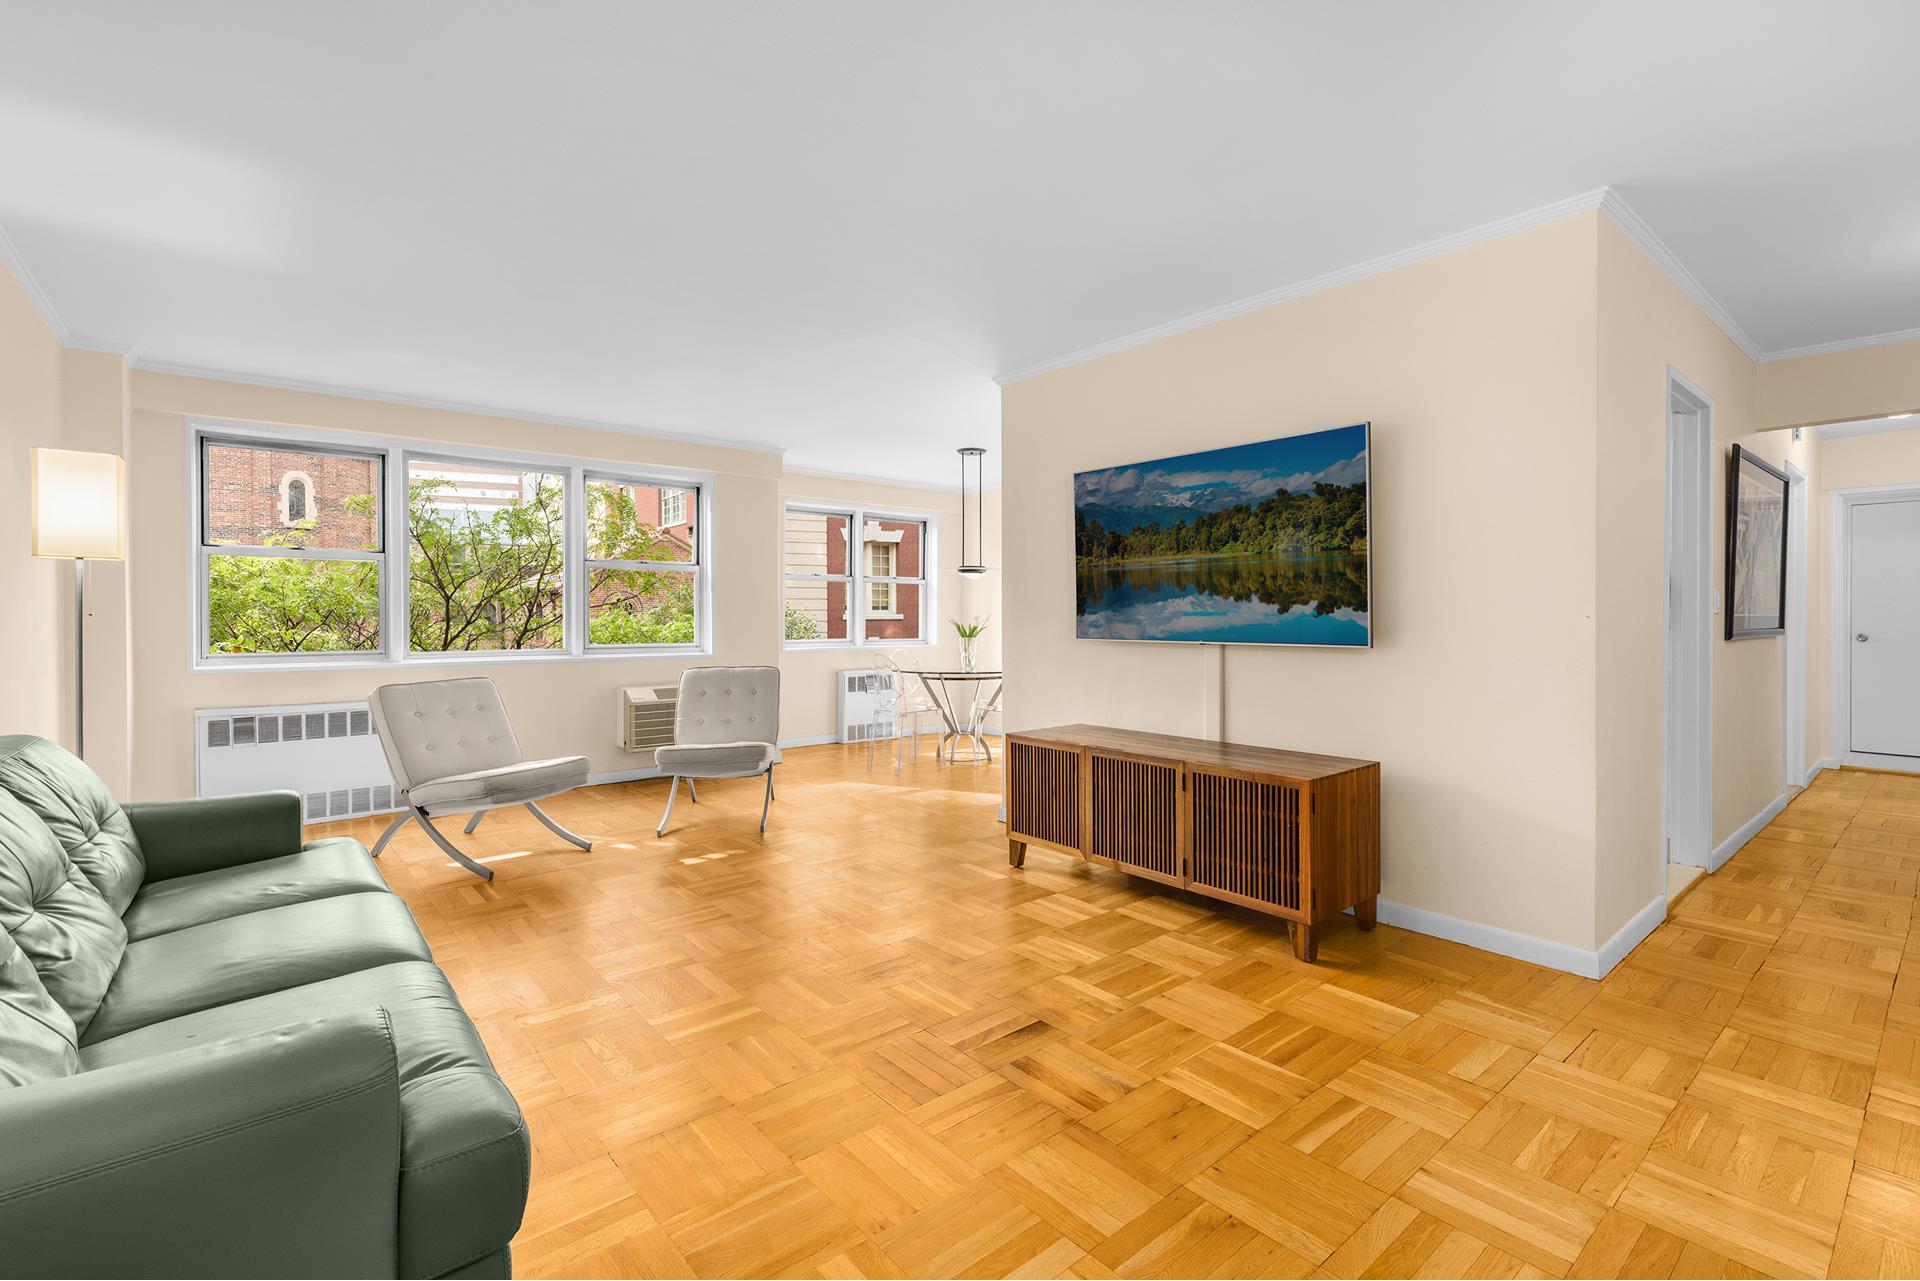 404 East 66th Street 4E, Lenox Hill, Upper East Side, NYC - 2 Bedrooms  
2 Bathrooms  
5 Rooms - 